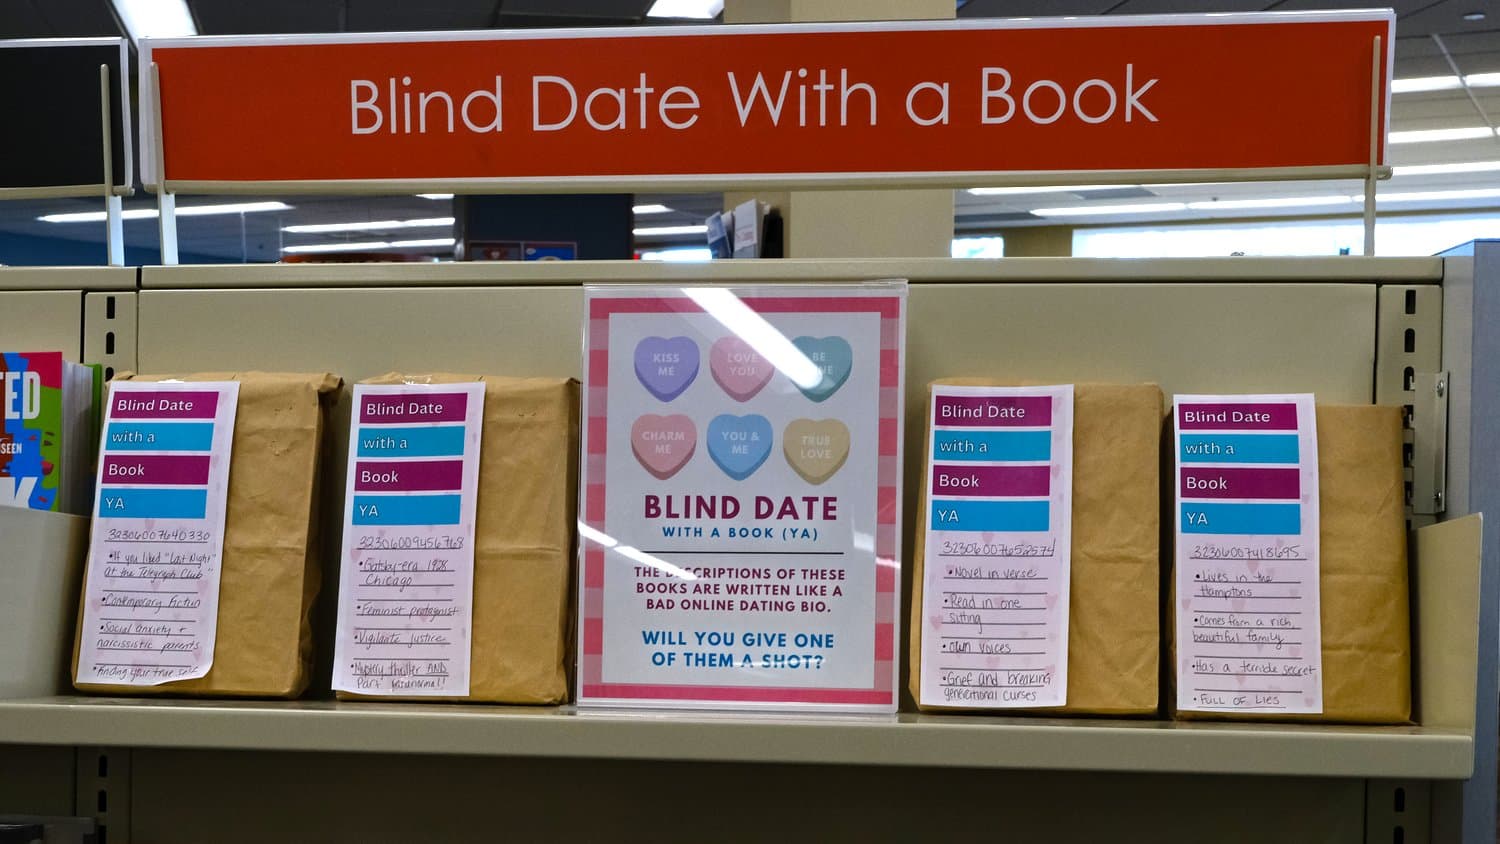 Blind Date with a book.